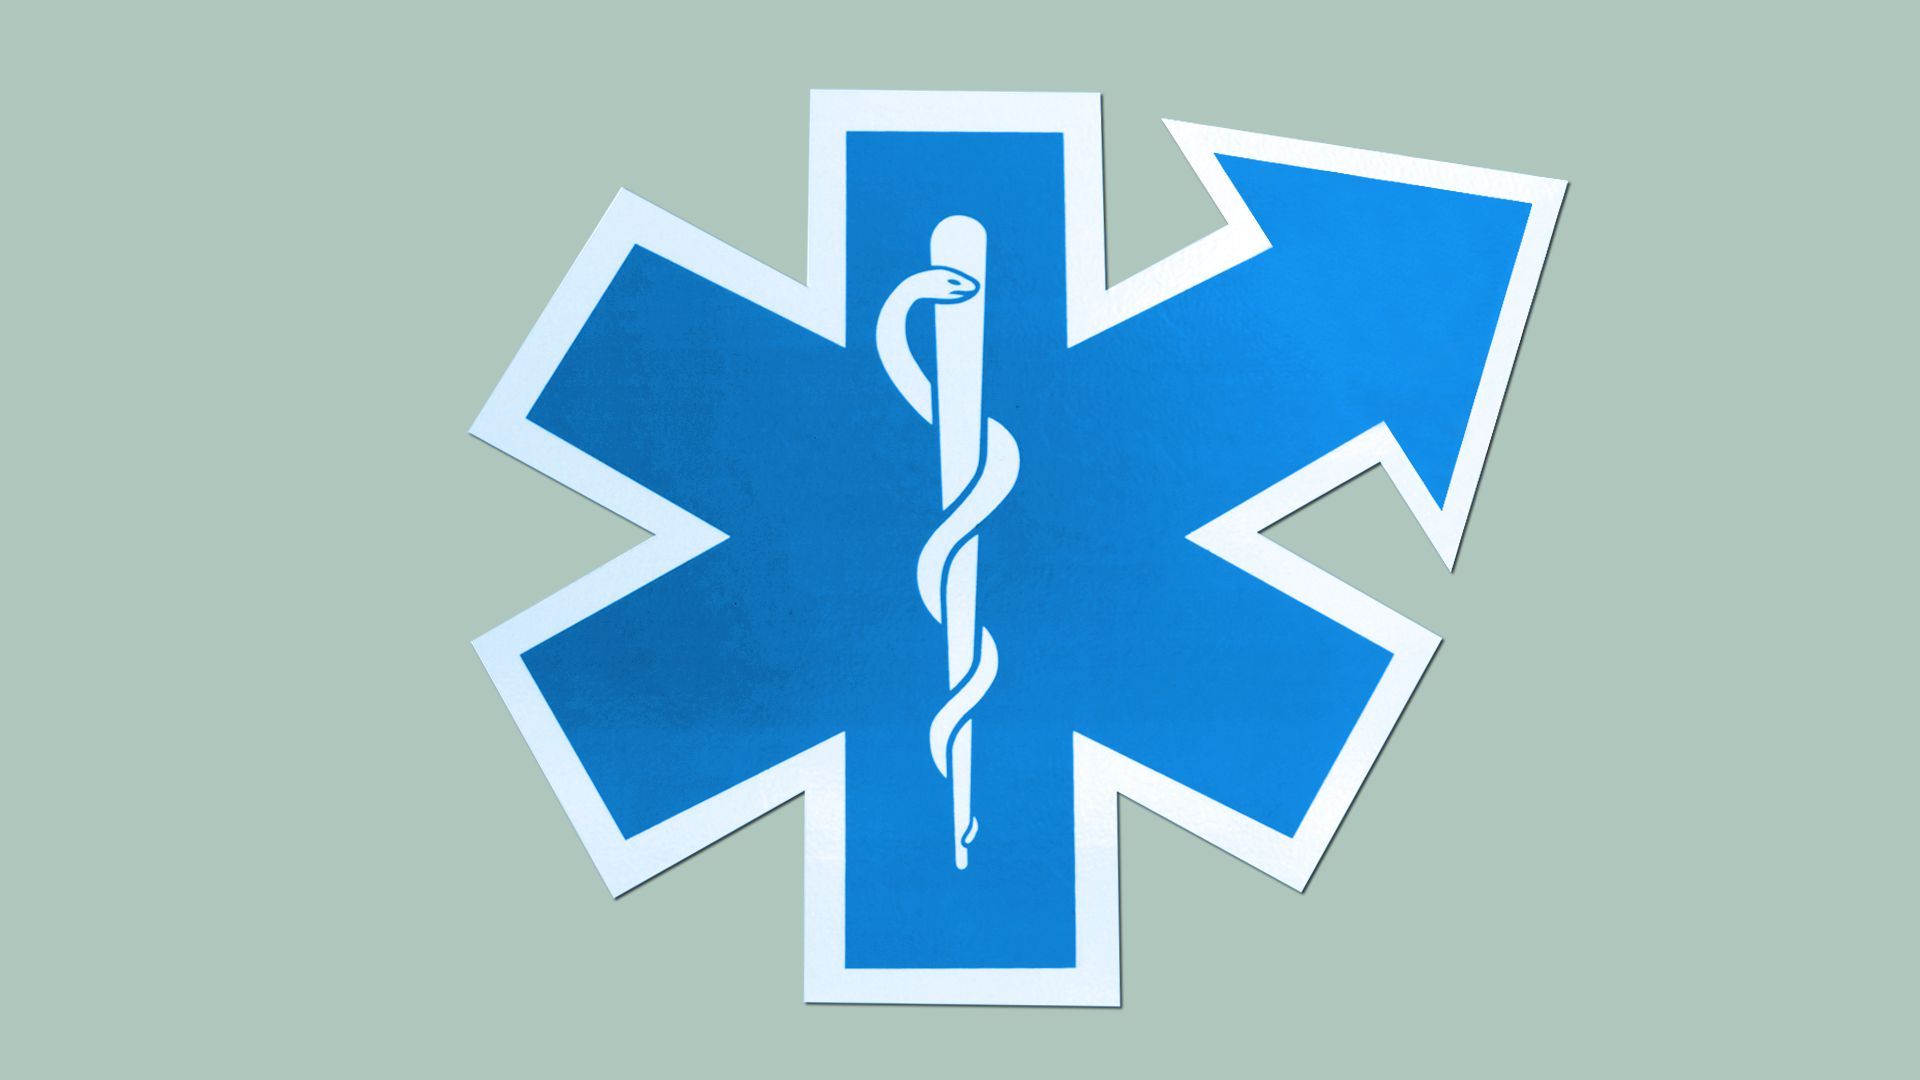 Illustration of an EMS symbol with one of the crossbars forming an upward arrow.